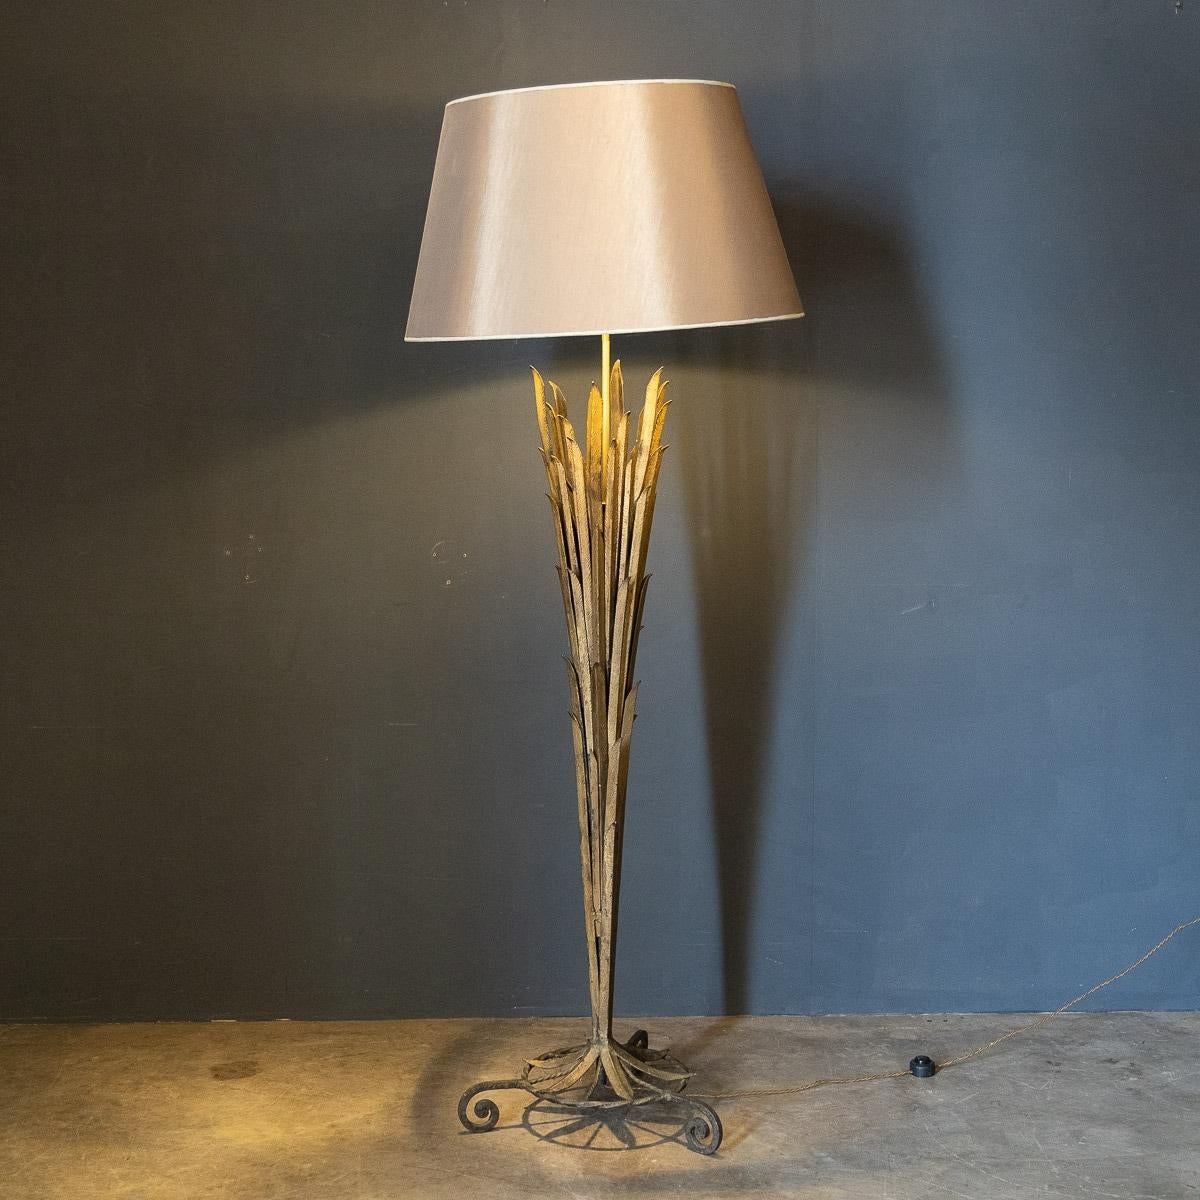 A French Gilt Wrought Iron Floor Lamp, Attributed To Maison Bagues, c.1970 In Good Condition For Sale In Royal Tunbridge Wells, Kent